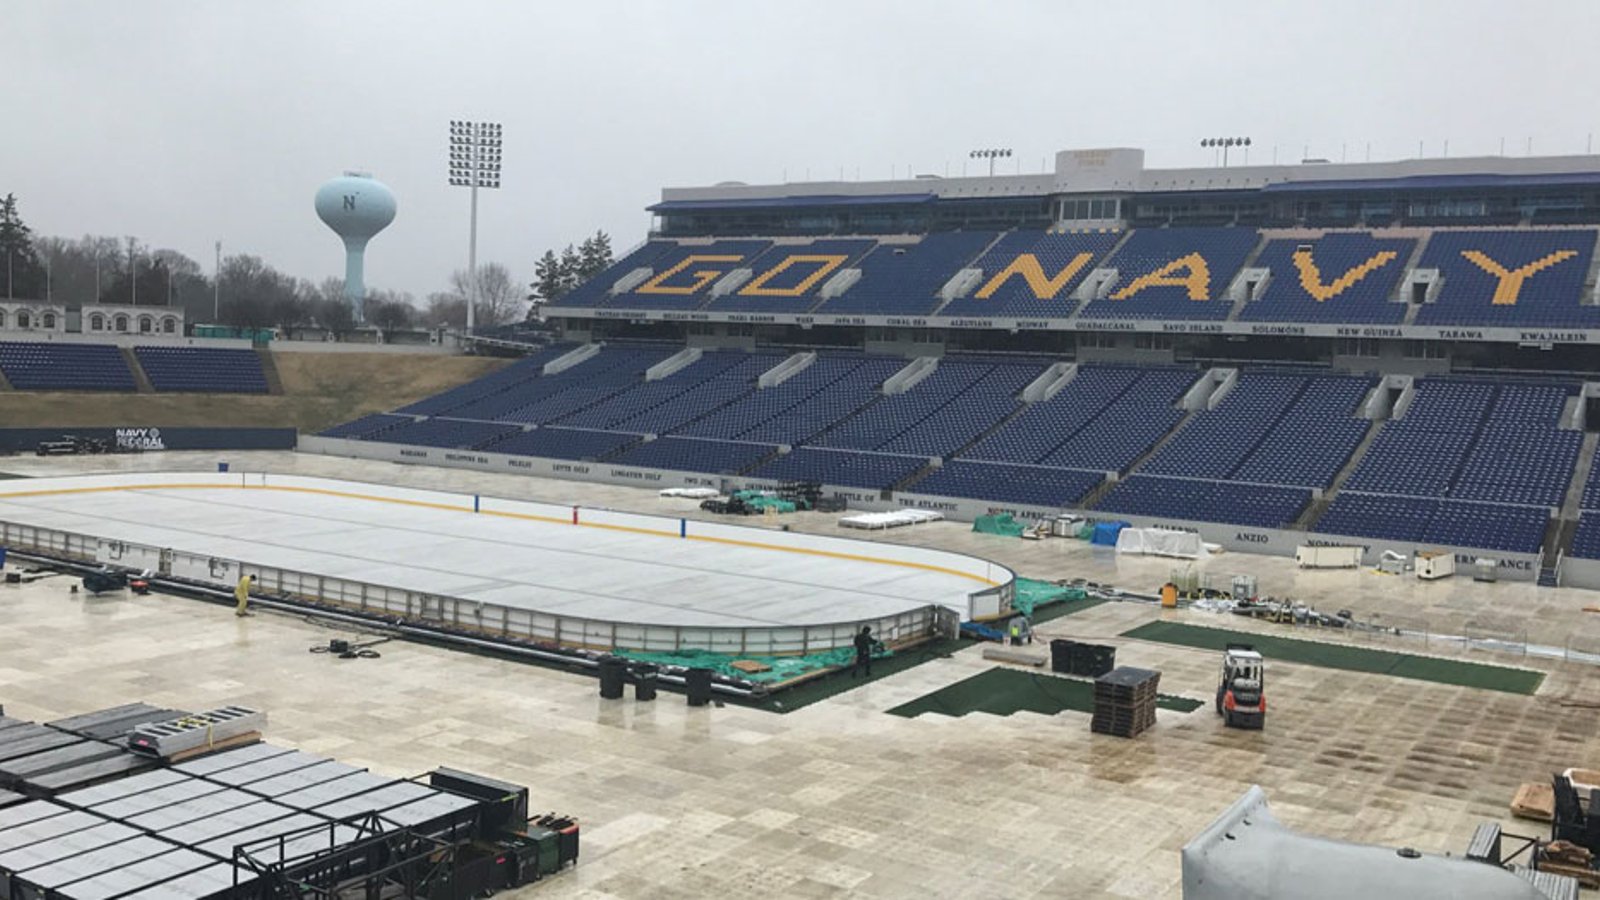 Breaking: There is a huge issue with tonight's outdoor game